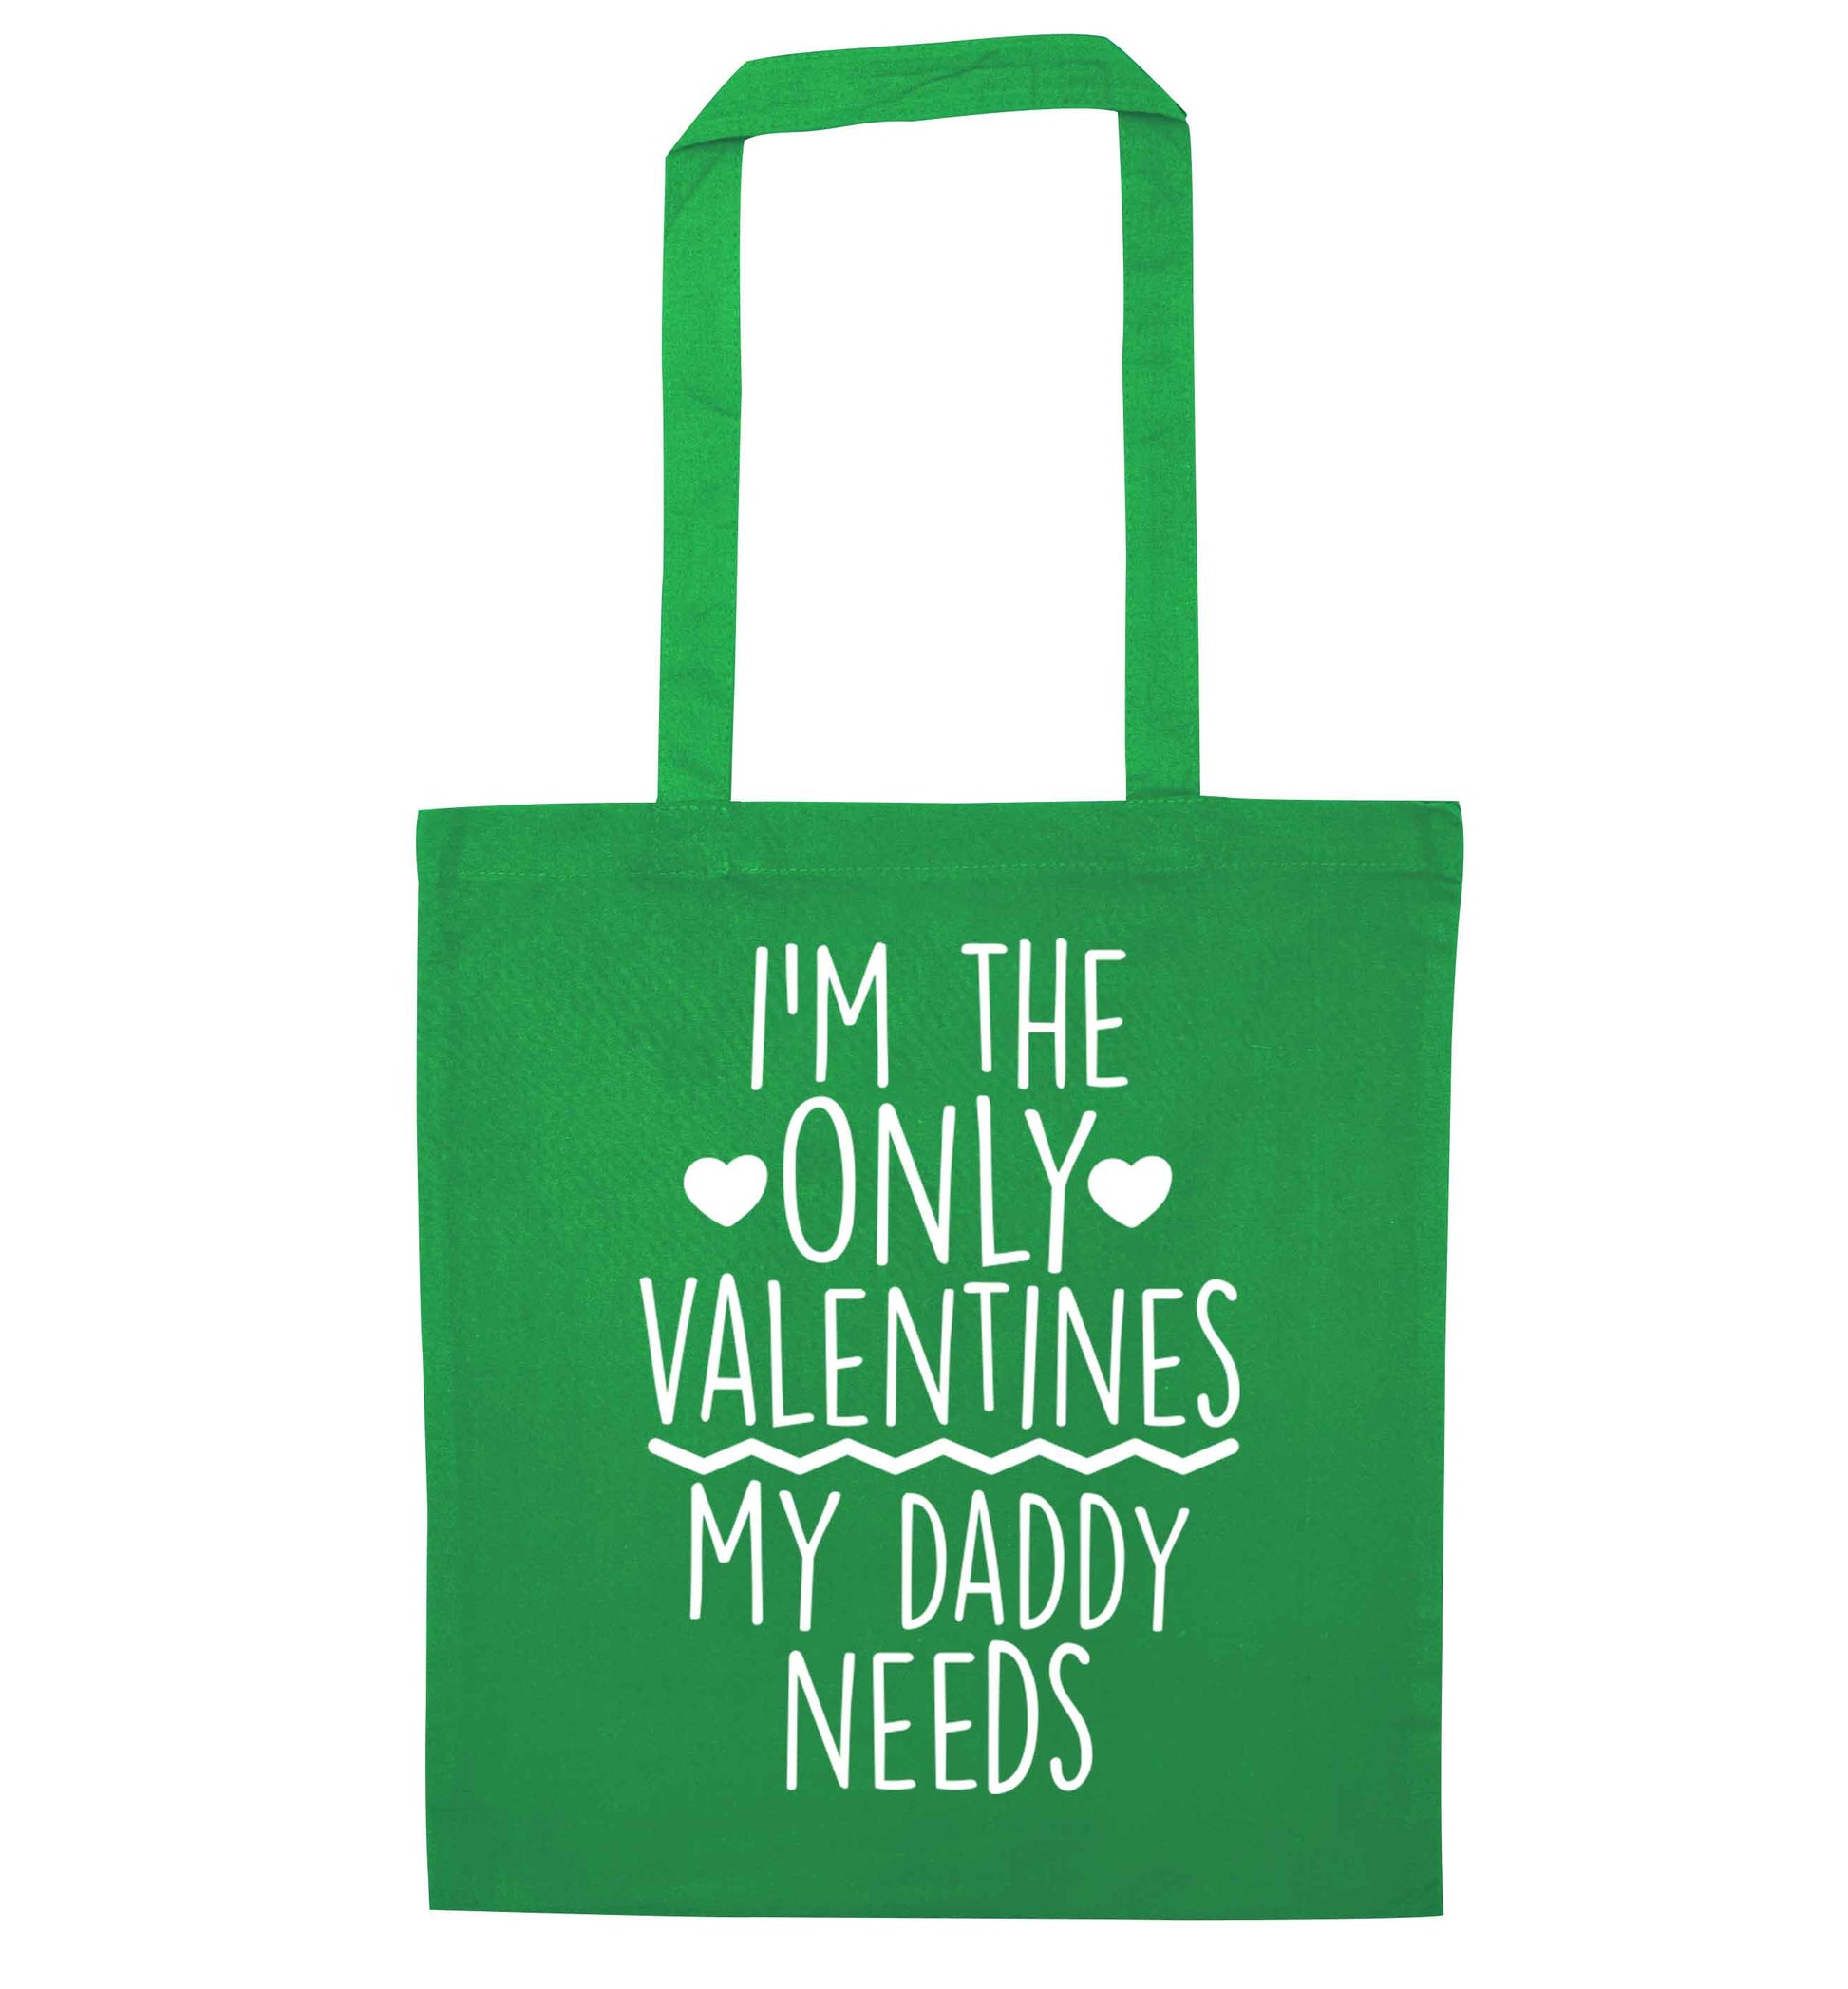 I'm the only valentines my daddy needs green tote bag